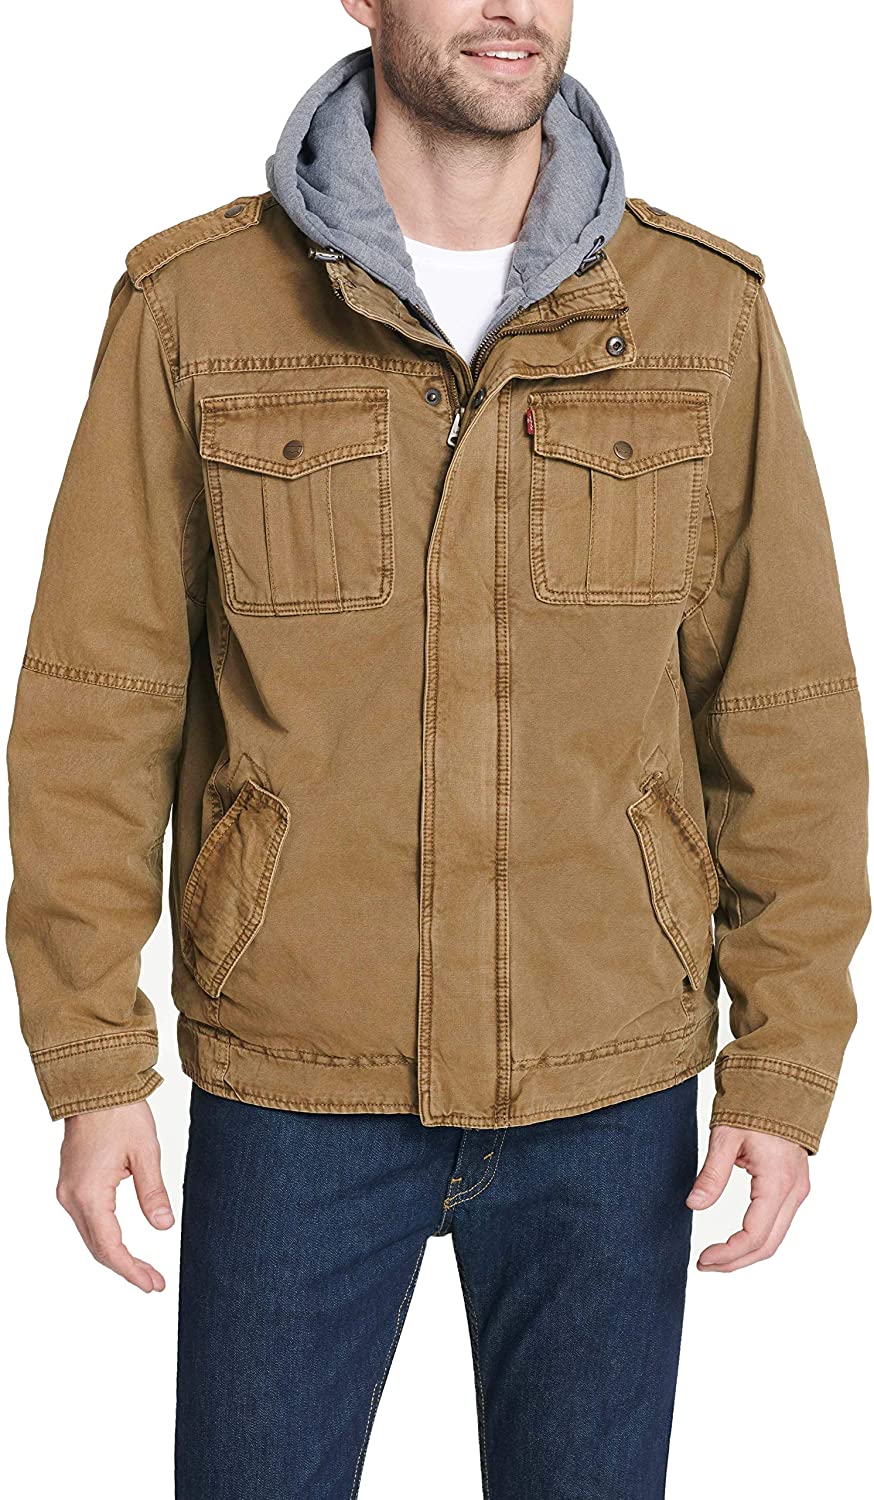 Levi's Men's Washed Cotton Military Jacket with Removable and Big | eBay